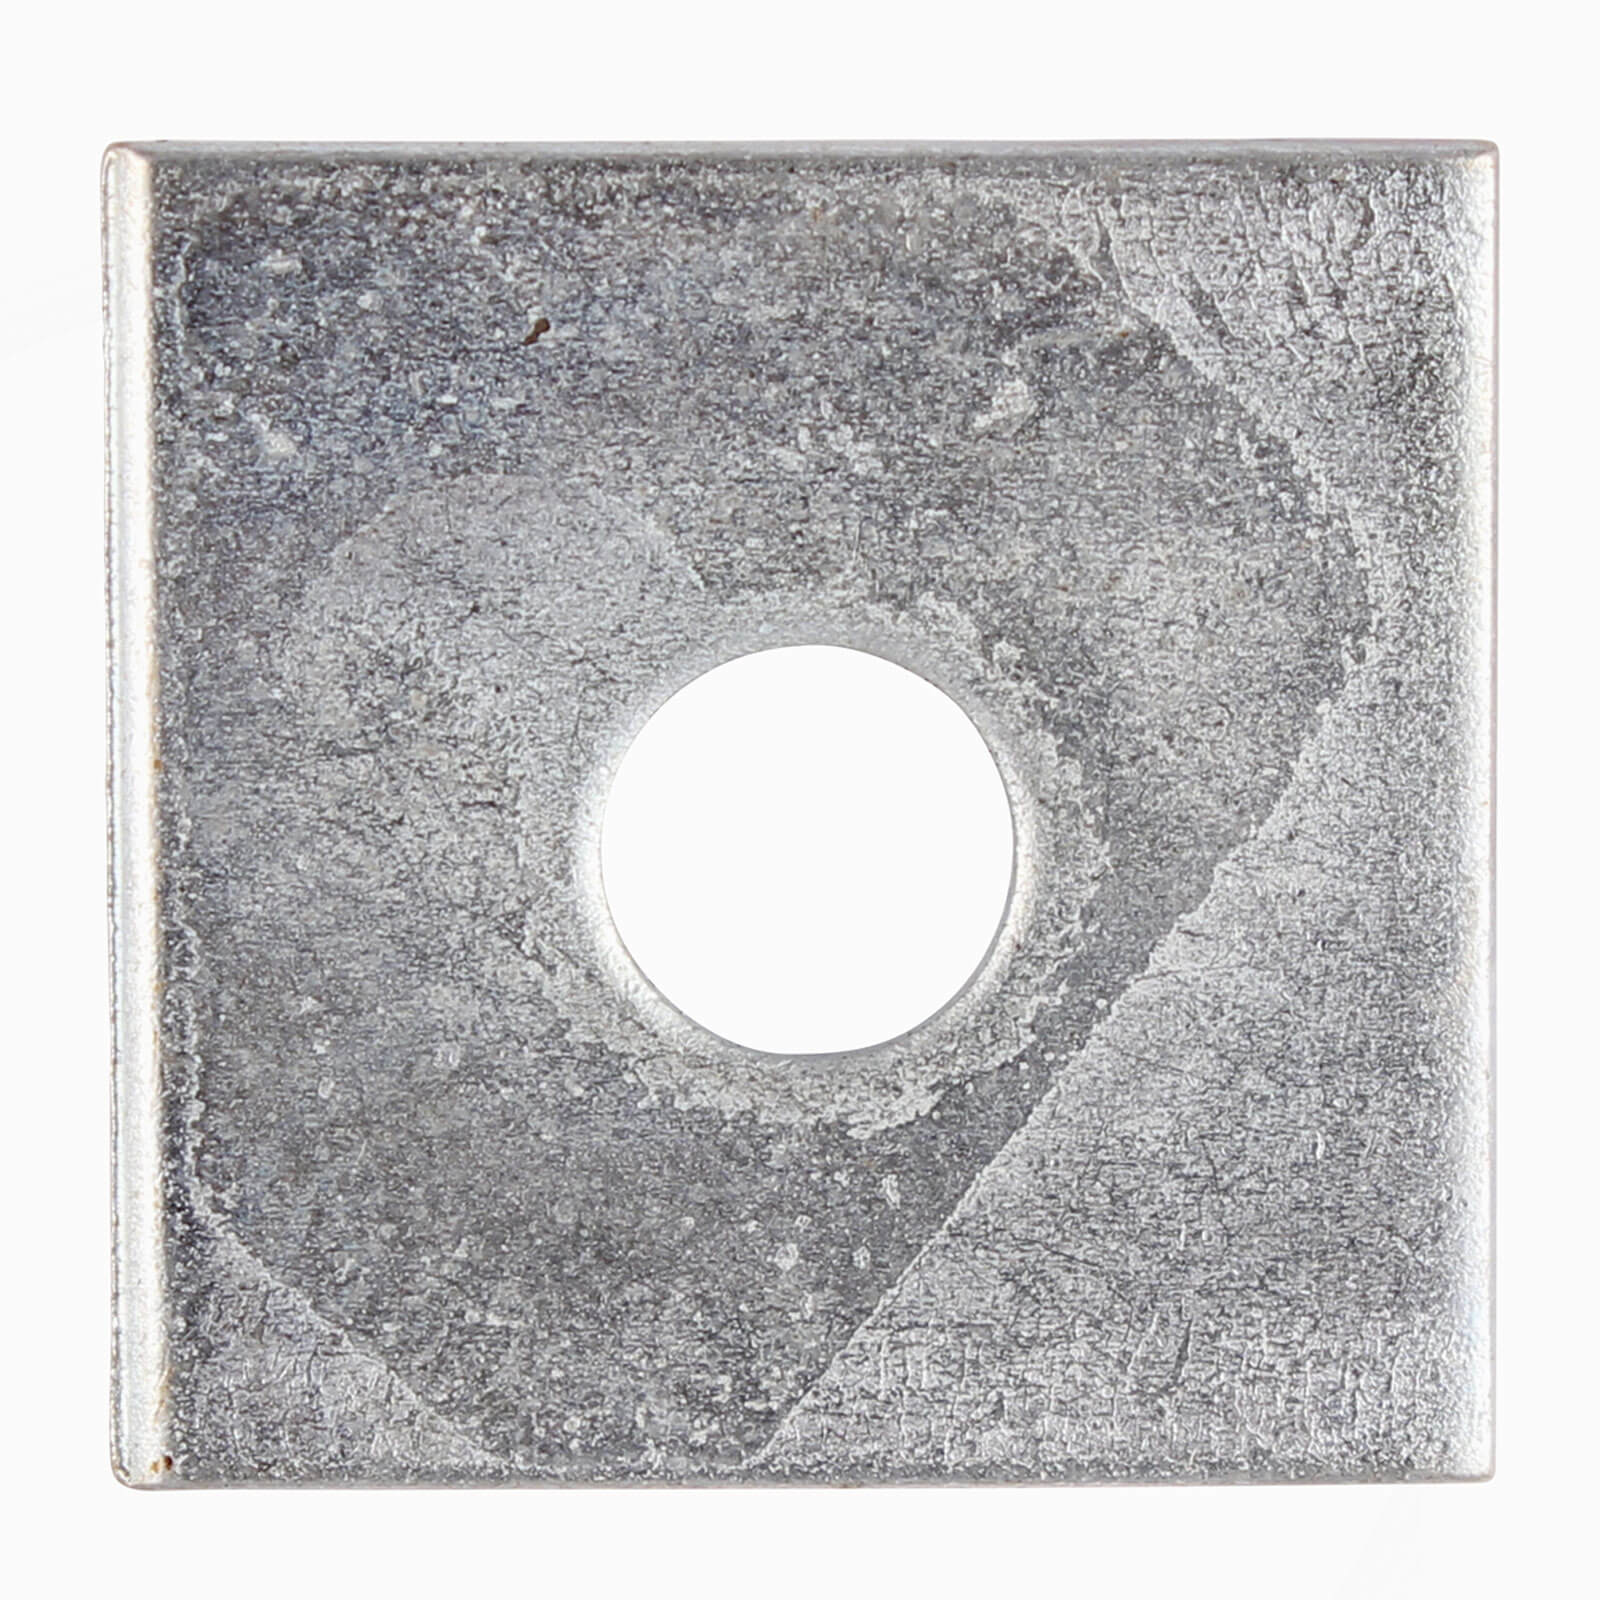 Image of Square Plate Washer Zinc Plated 10mm 50mm Pack of 30